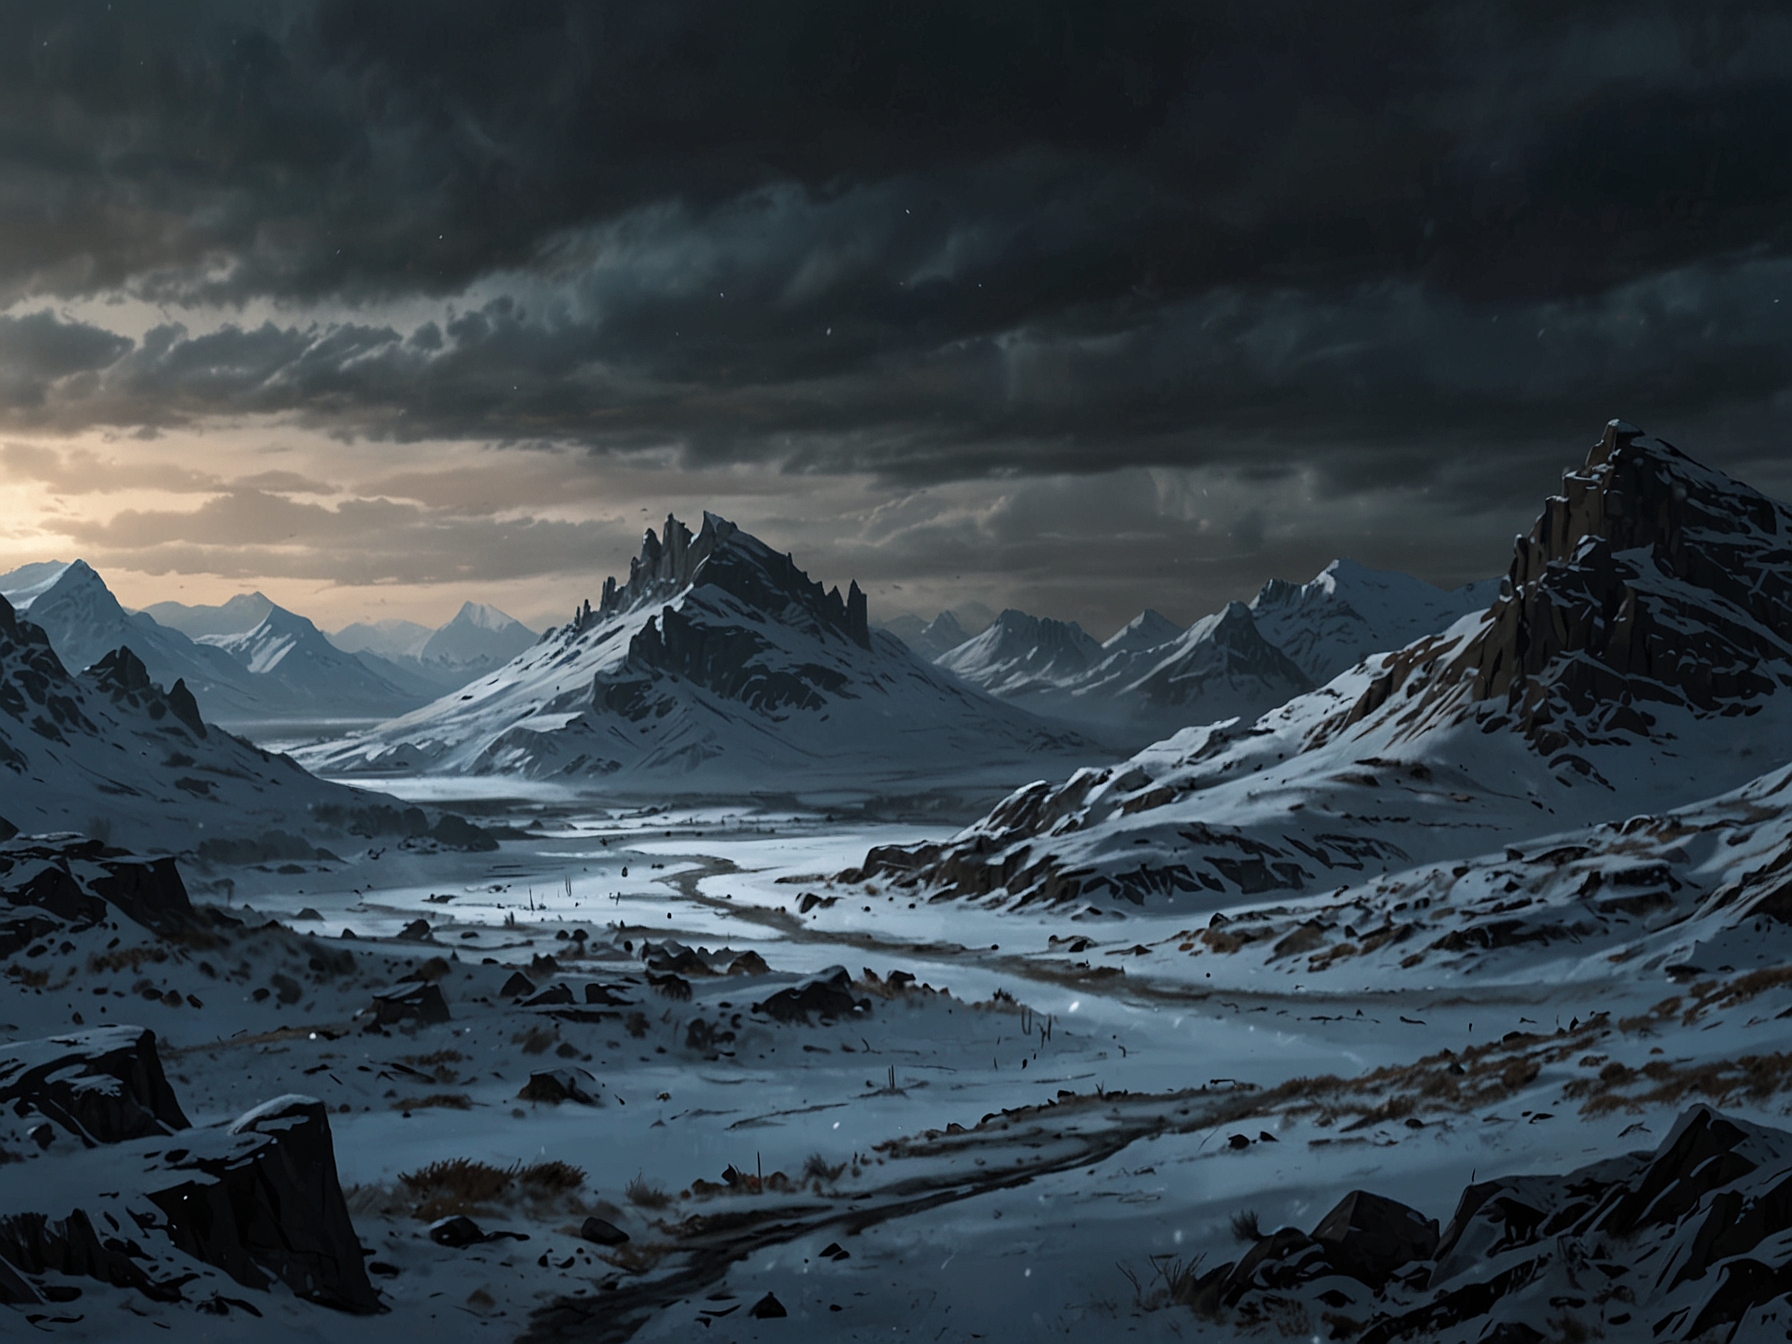 A panoramic shot of the icy and foreboding landscape of Westeros, setting the stage for the narrative.